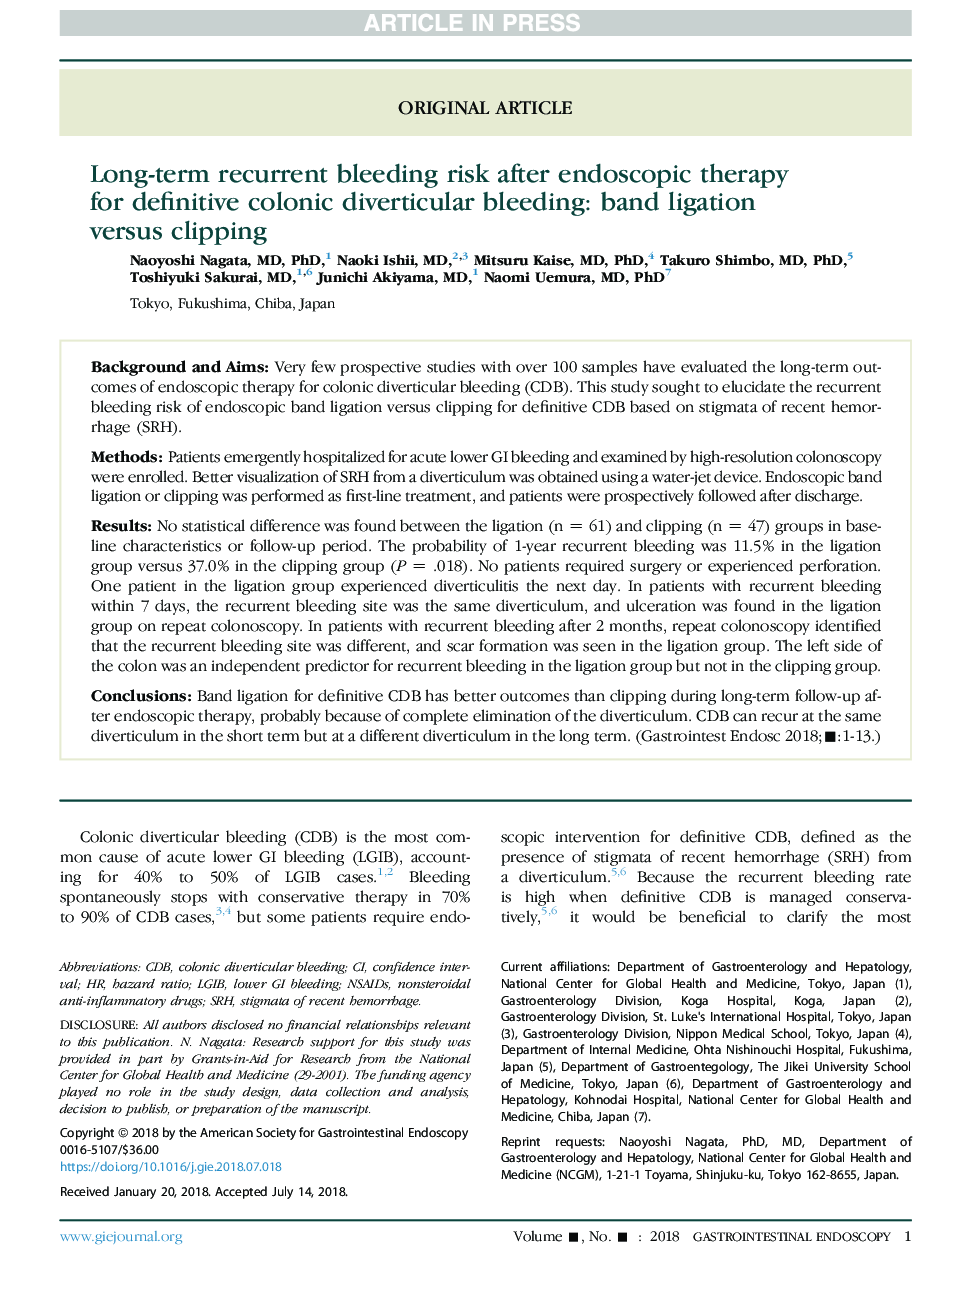 Long-term recurrent bleeding risk after endoscopic therapy forÂ definitive colonic diverticular bleeding: band ligation versusÂ clipping